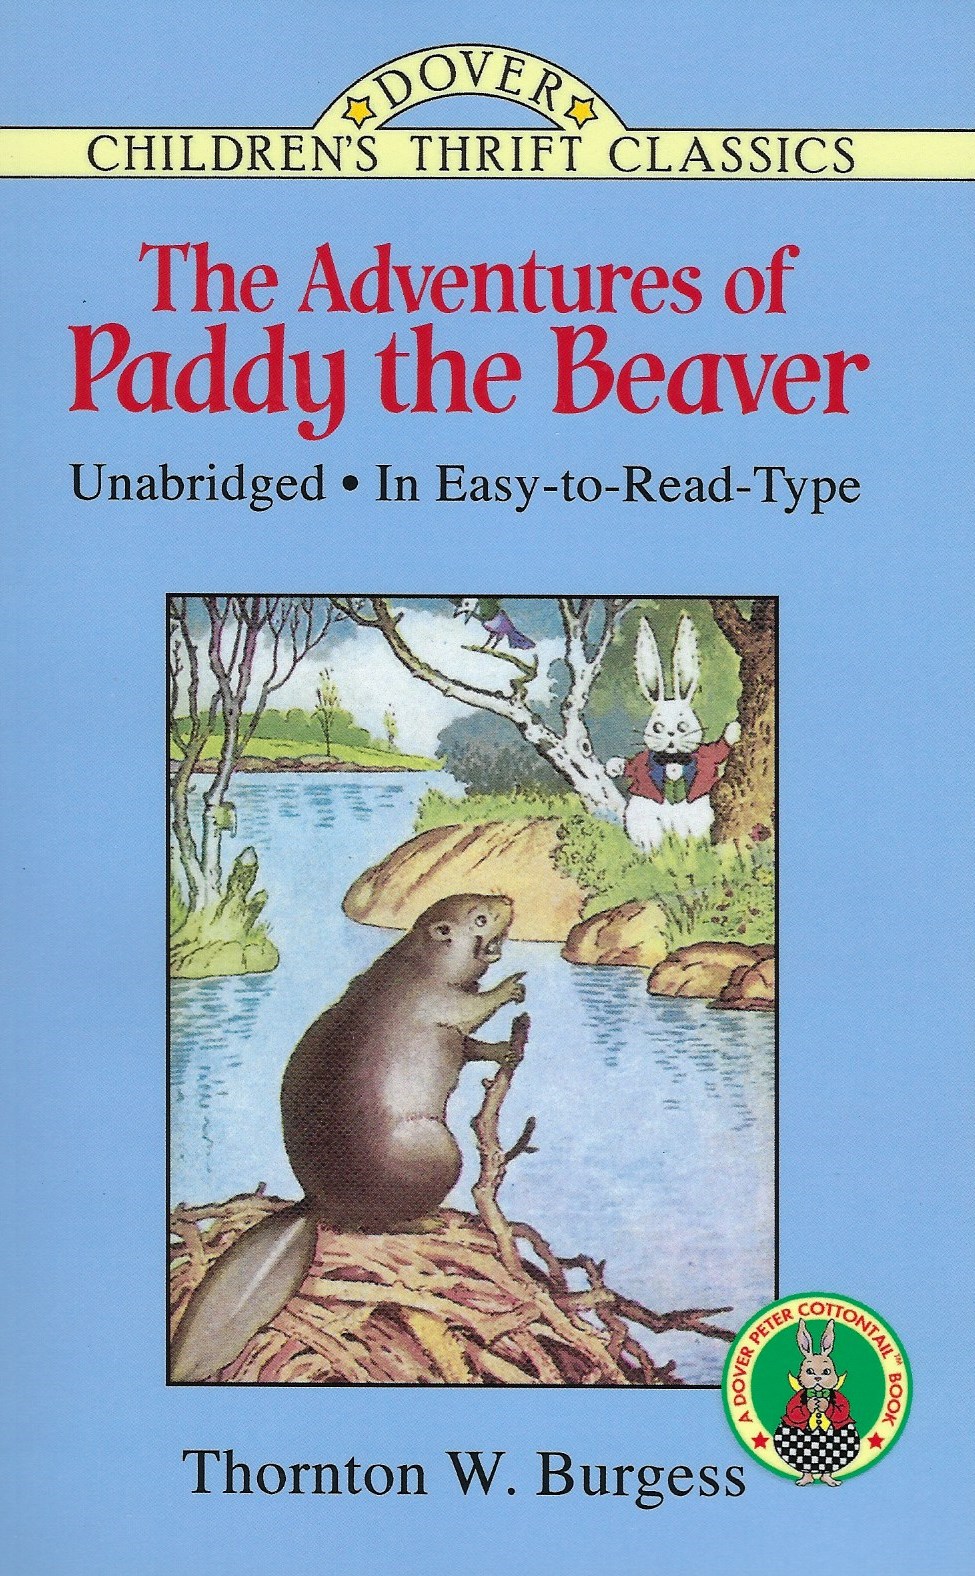 THE ADVENTURES OF PADDY THE BEAVER Thornton W. Burgess